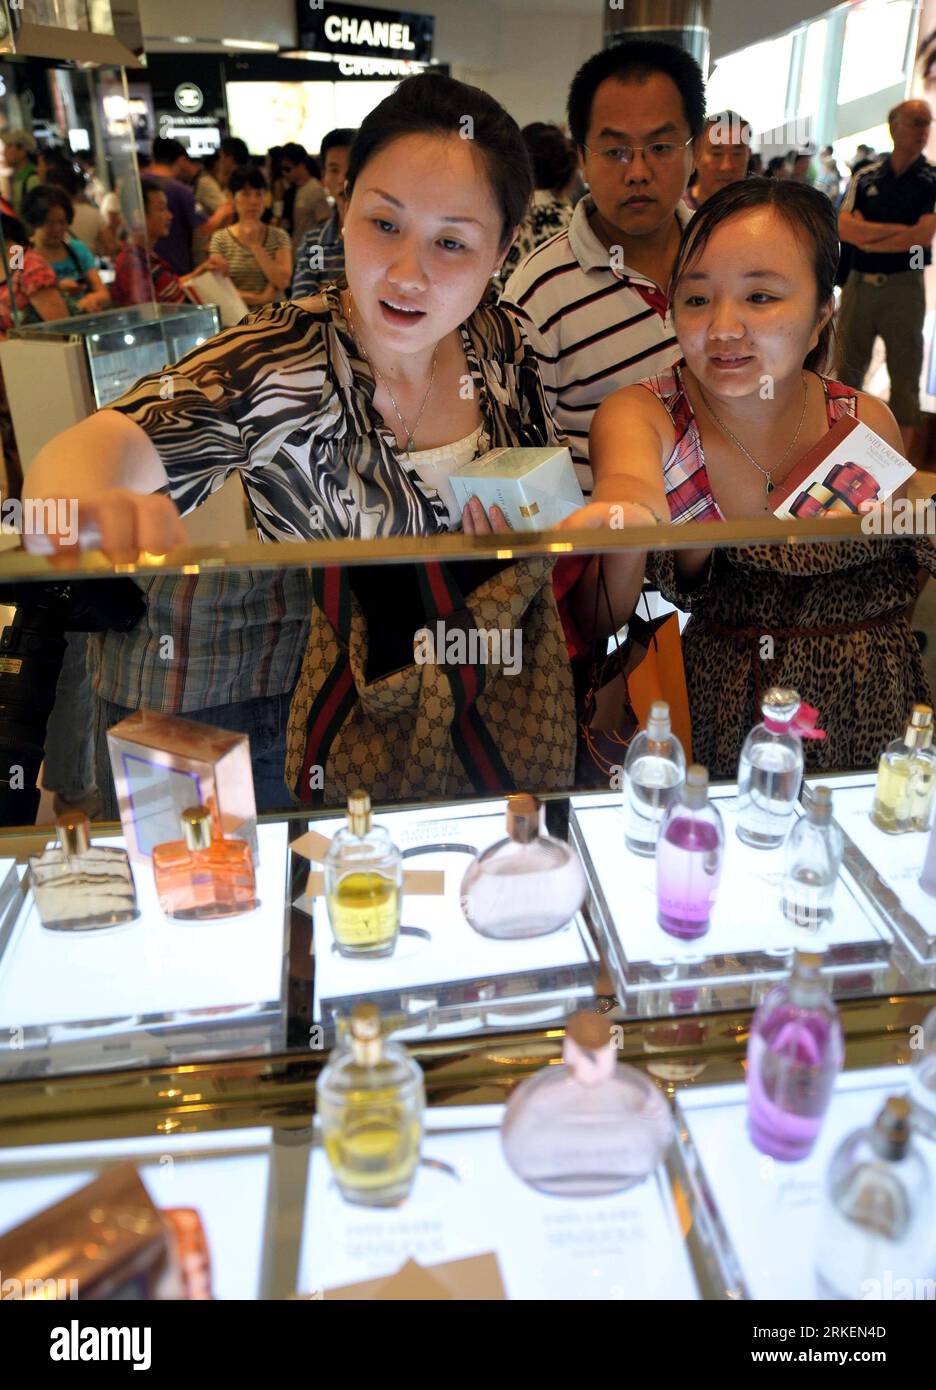 Bildnummer: 55277546  Datum: 20.04.2011  Copyright: imago/Xinhua (110420) -- SANYA, April 20, 2011 (Xinhua) -- Customers choose perfumes at a tax-free shop in Sanya, south China s Hainan Province, April 20, 2011. An offshore tax-free scheme for mainland shoppers is due to kick off on a trial basis across Hainan from April 20. The policy will prevent mainland visitors from paying various types of taxes on up to 5,000 (762 US dollars) worth of imported goods bought at selected duty-free stores on the tropical islands province in the south China. Only travelers who are 18 or older will avoid payi Stock Photo